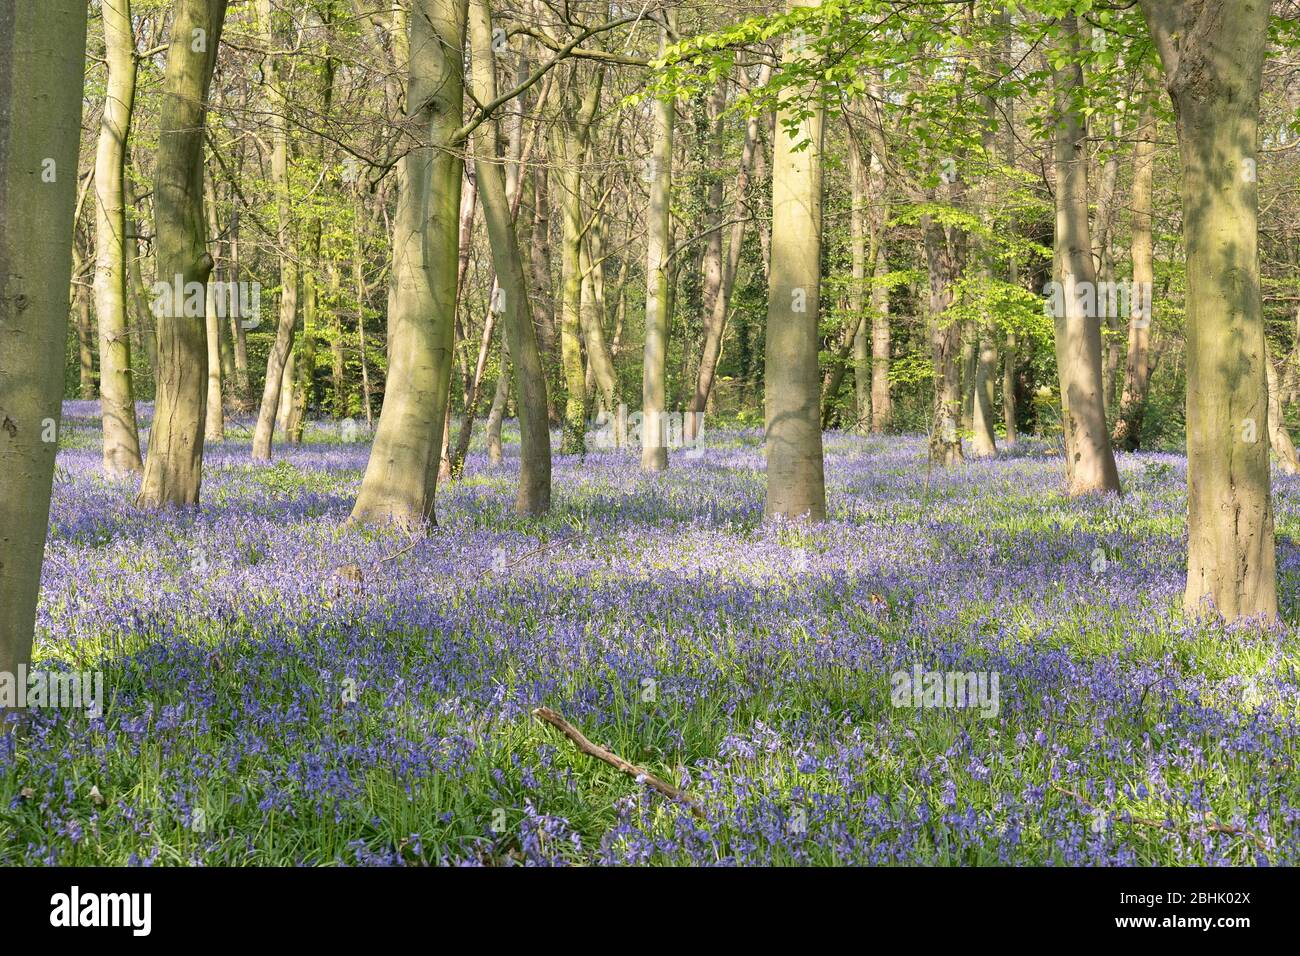 Bluebells in Chalet Wood,Epping forest,Wanstead,London Stock Photo